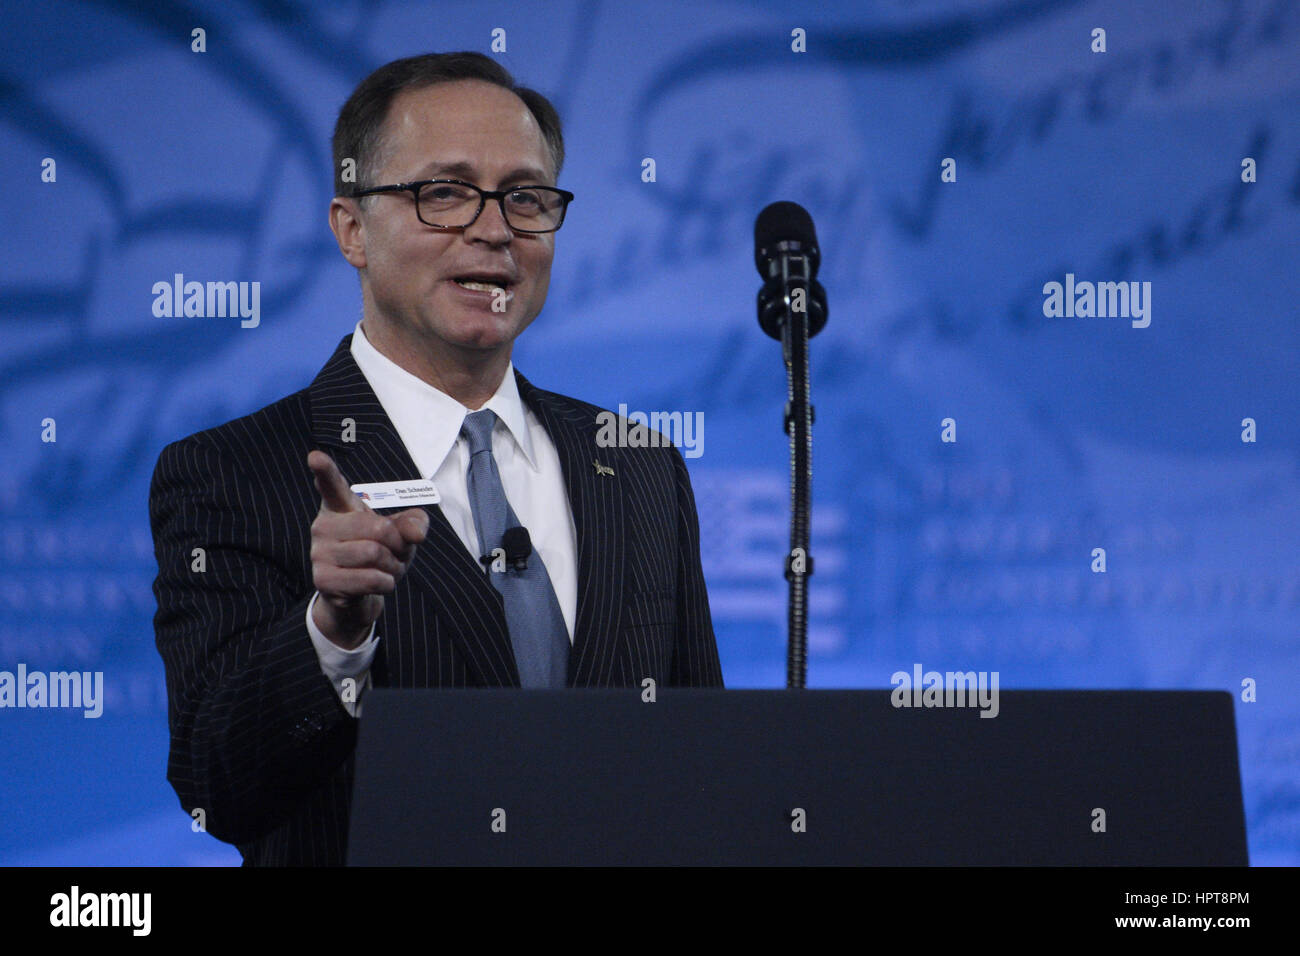 National Harbor, Maryland, USA. 24th Feb, 2017. Dan Schneider, Executive Director of the American Conservative Union, opens third day of the 2017 Conservative Political Action Conference. Credit: Evan Golub/ZUMA Wire/Alamy Live News Stock Photo